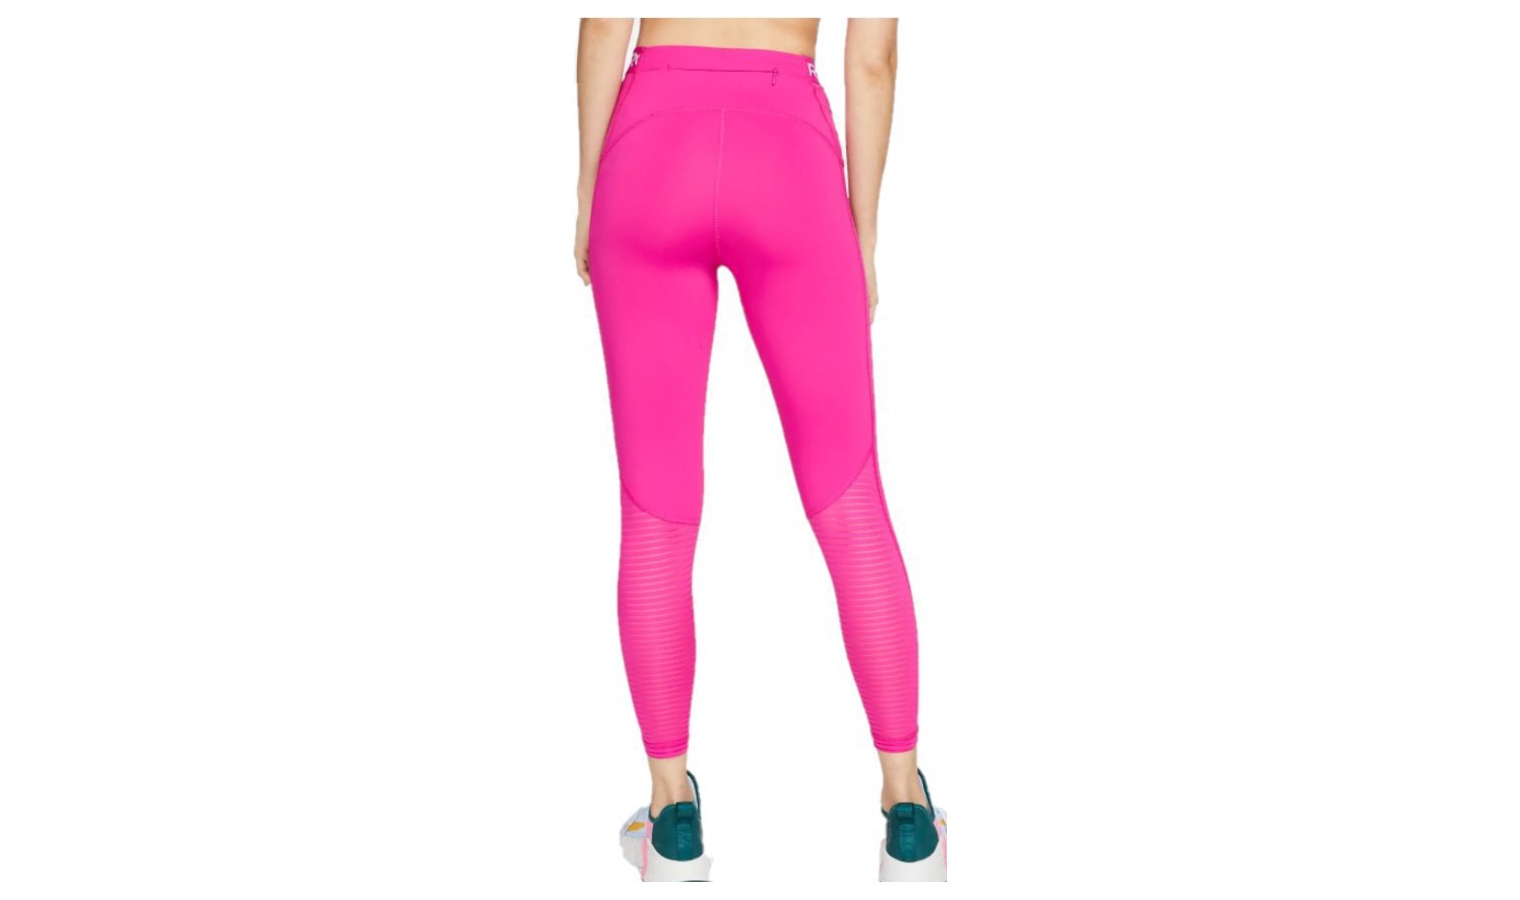 Nike Pro High-Waisted Leggings with Pockets 'Active Pink/White' -  DM6936-621